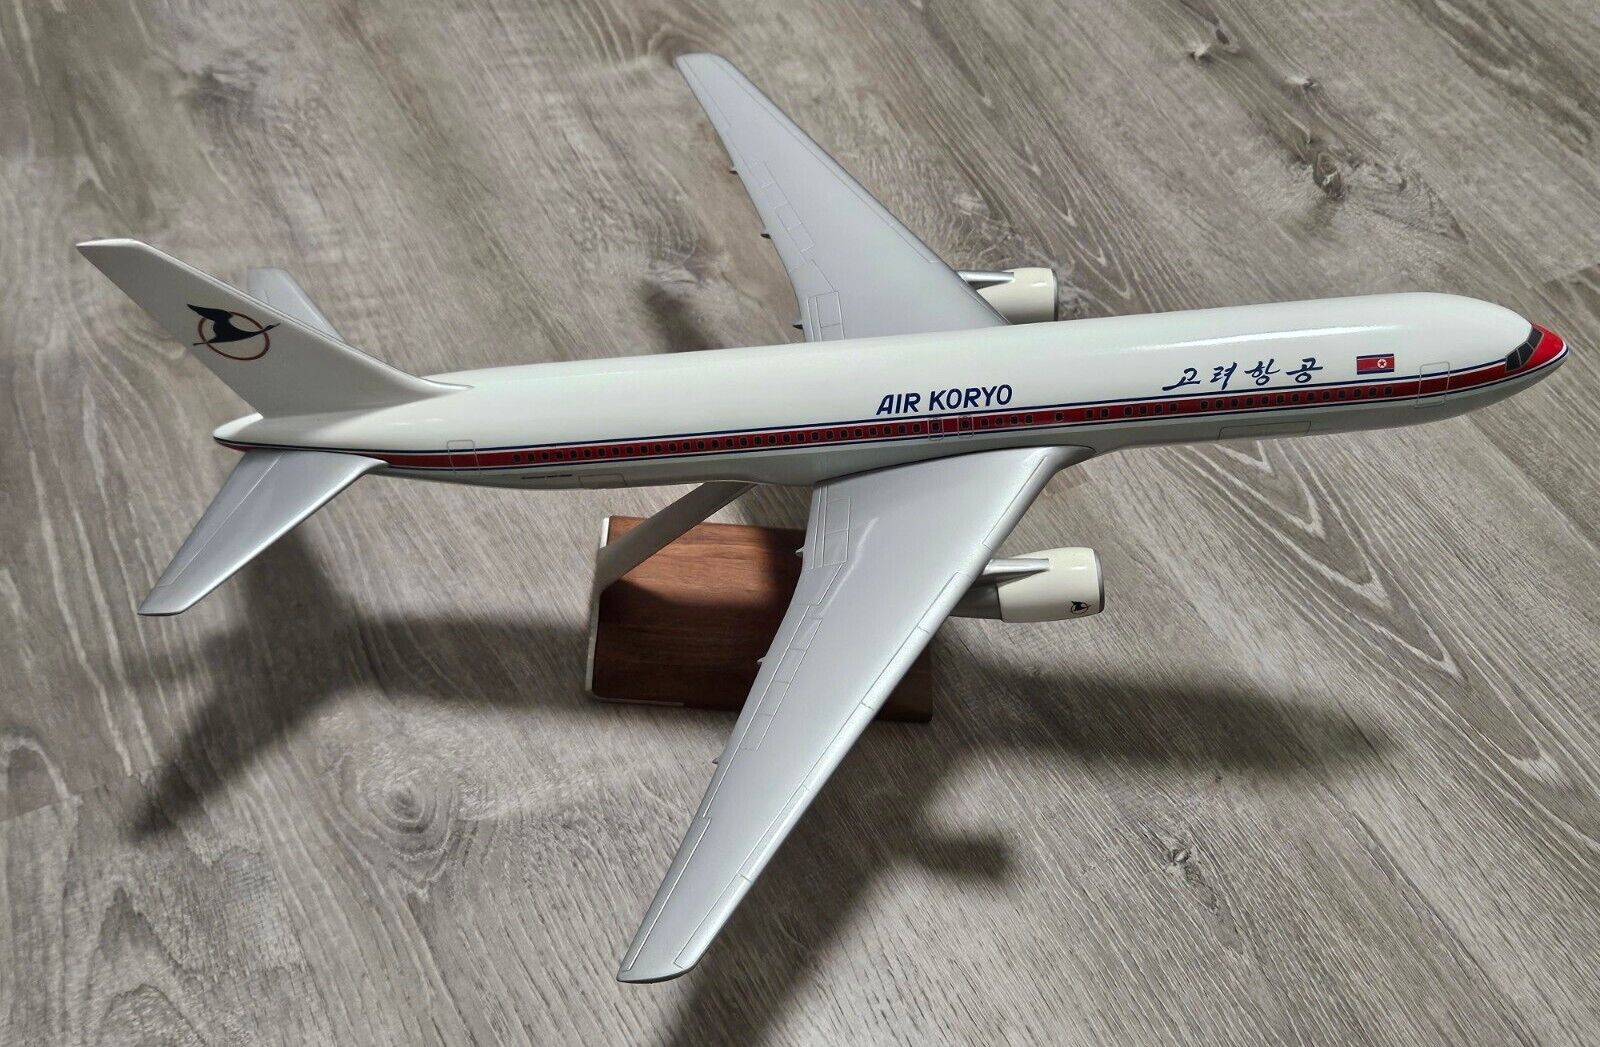 Rare Pacmin Air Koryo Airline Boeing 767-300 1/100 Scale Model